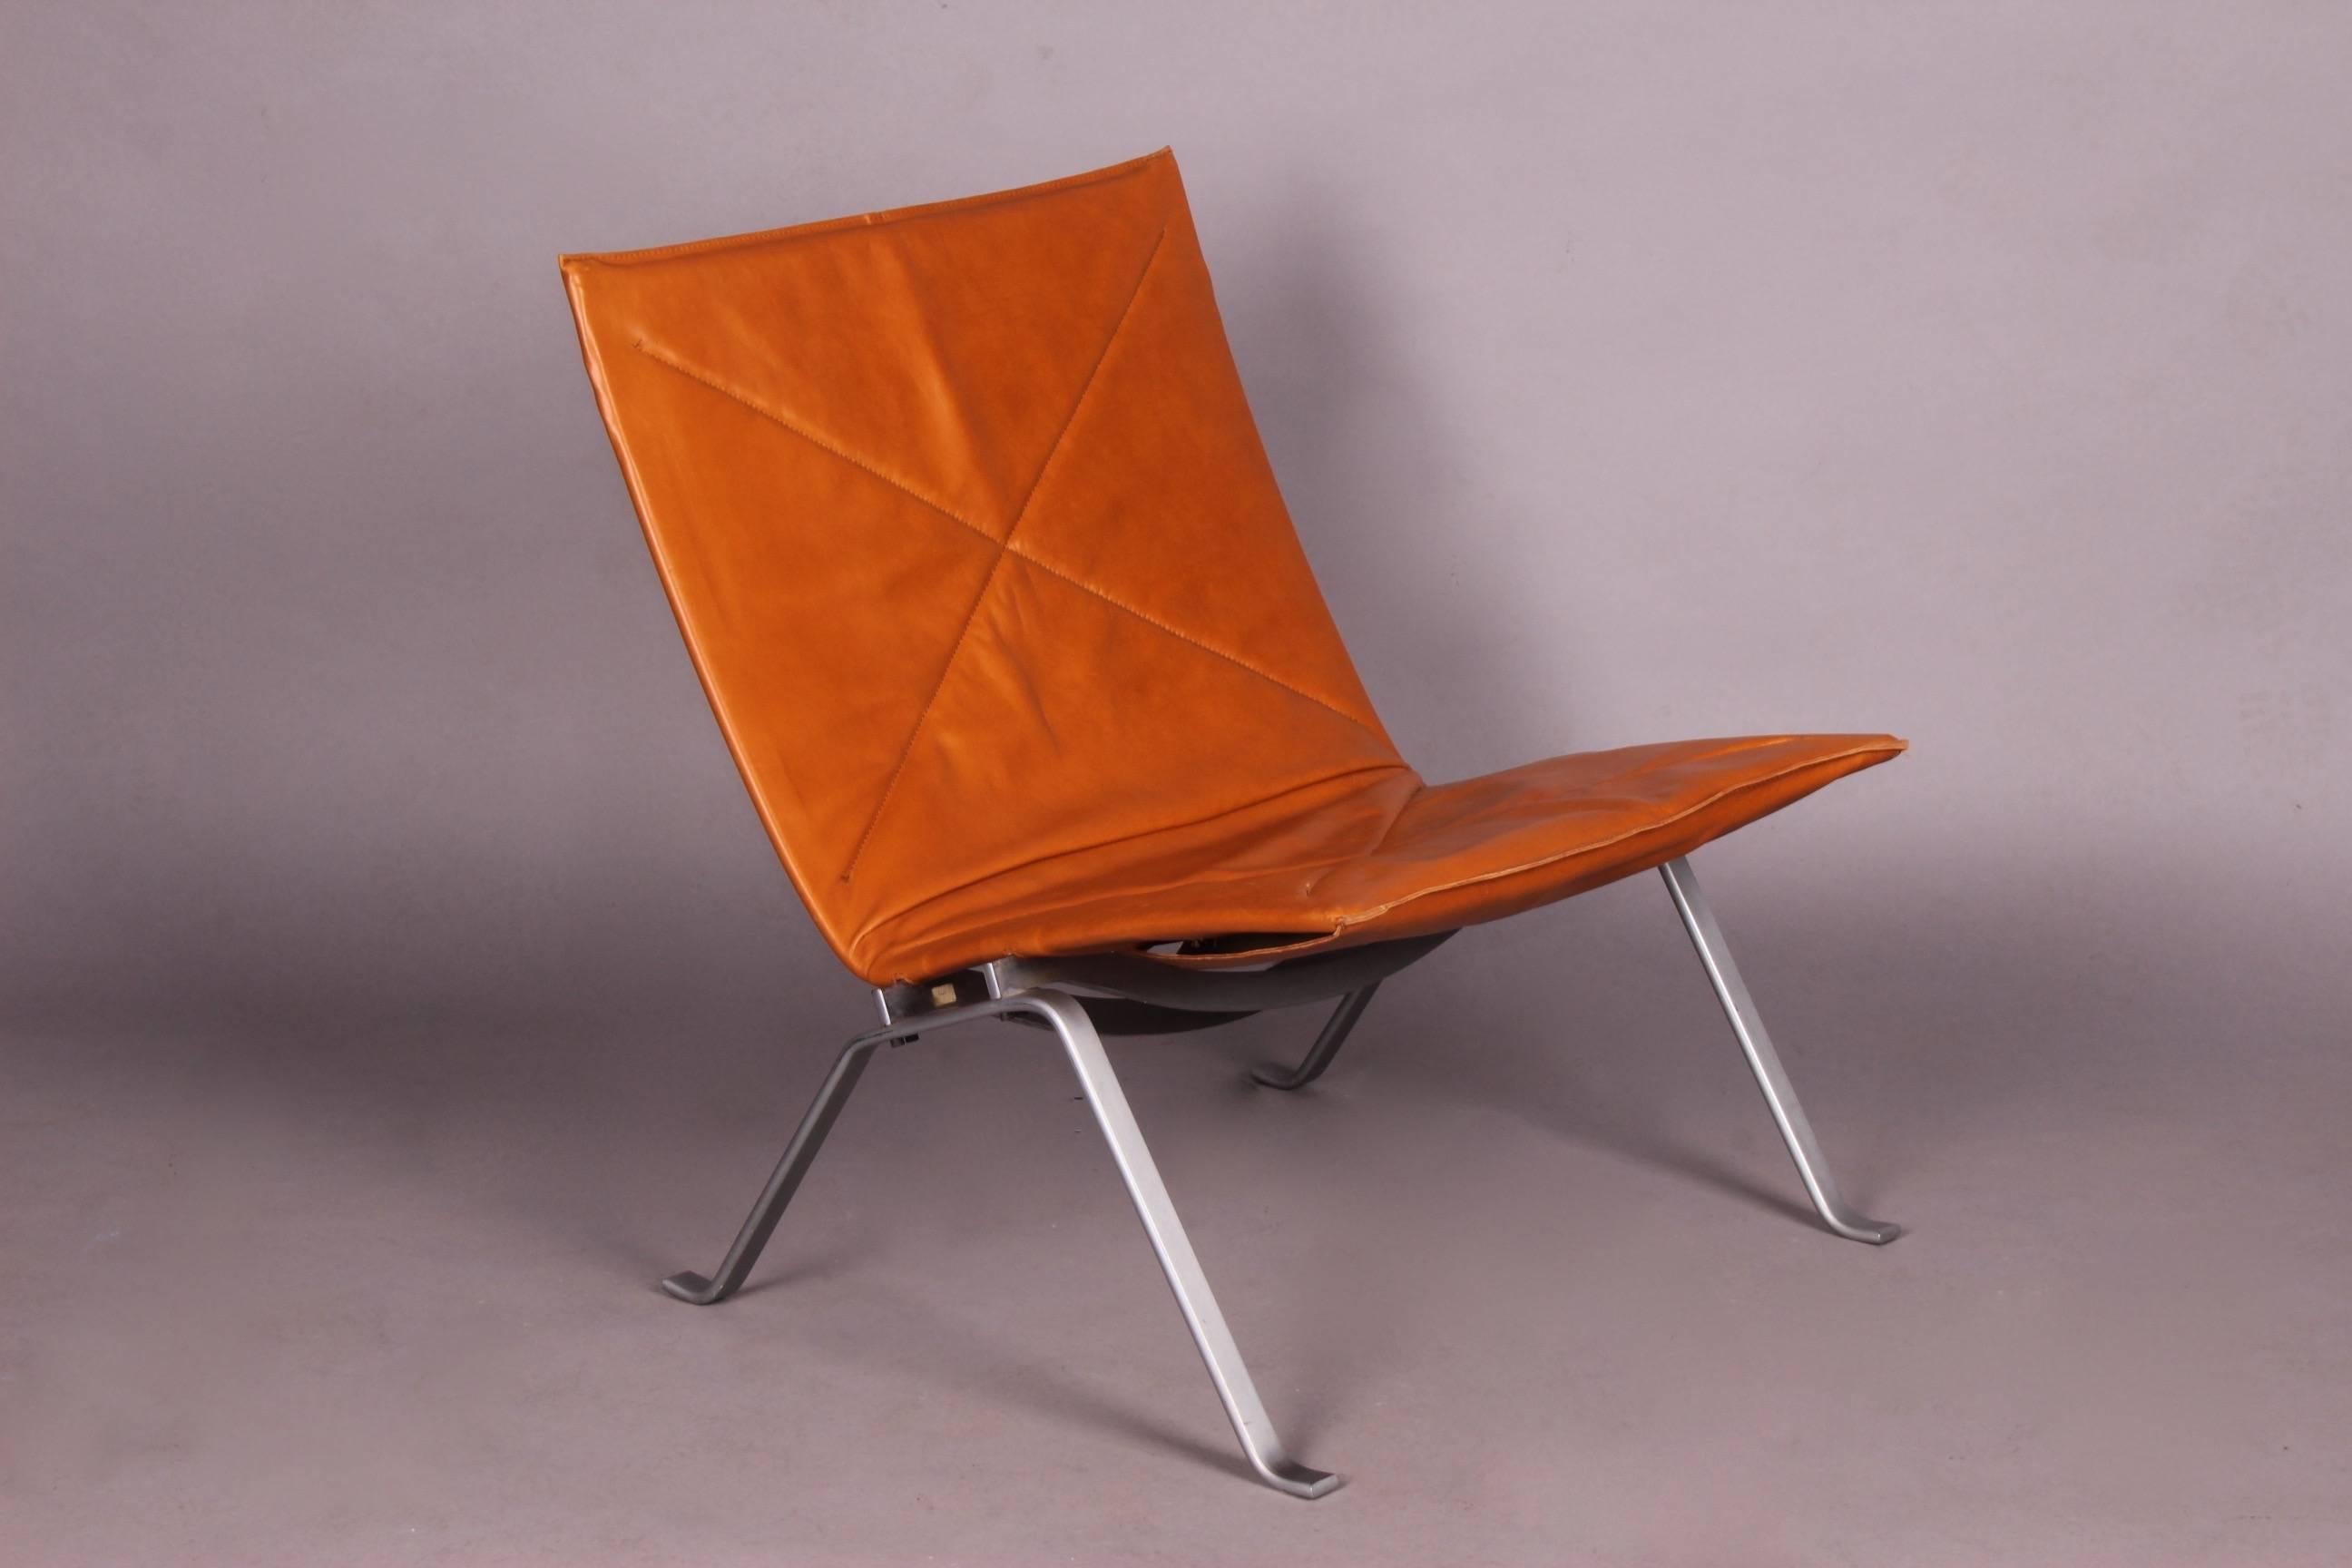 Leather and metal lounge chair by Poul Kjaerholm ed Christensen with stamped new cognac leather.